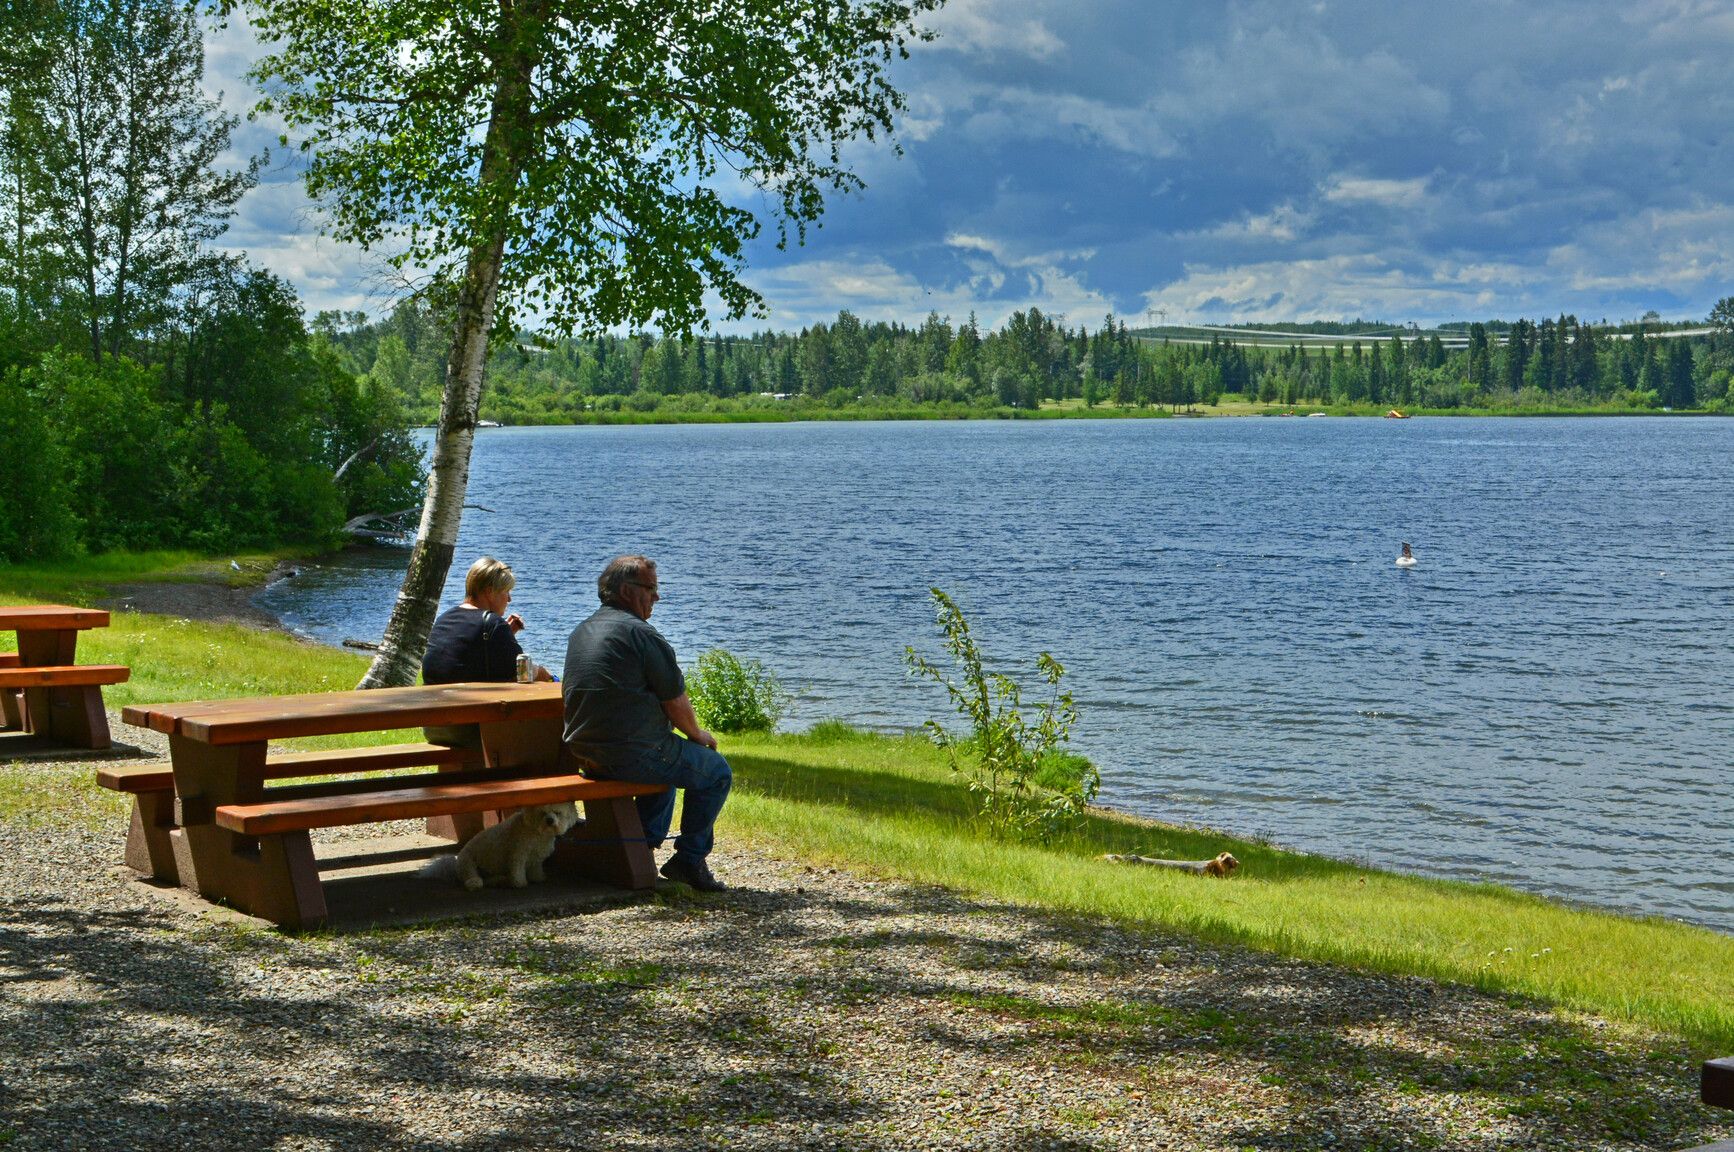 Relax and enjoy the view of Ten Mile Lake.